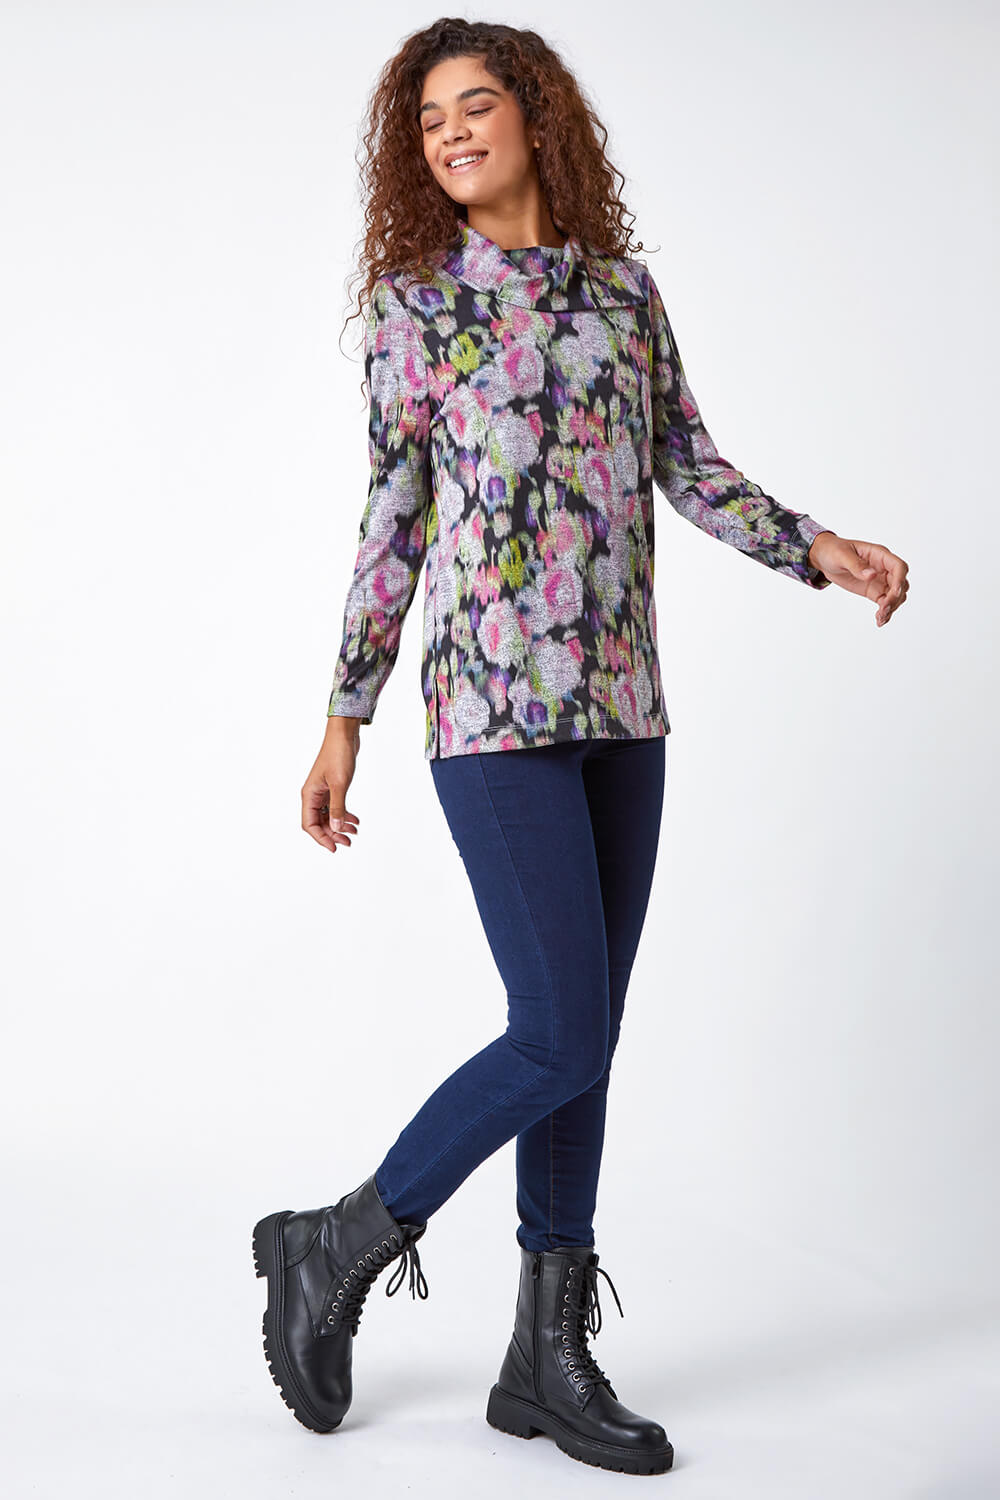 Grey Floral Print Fold Neck Stretch Top, Image 2 of 5